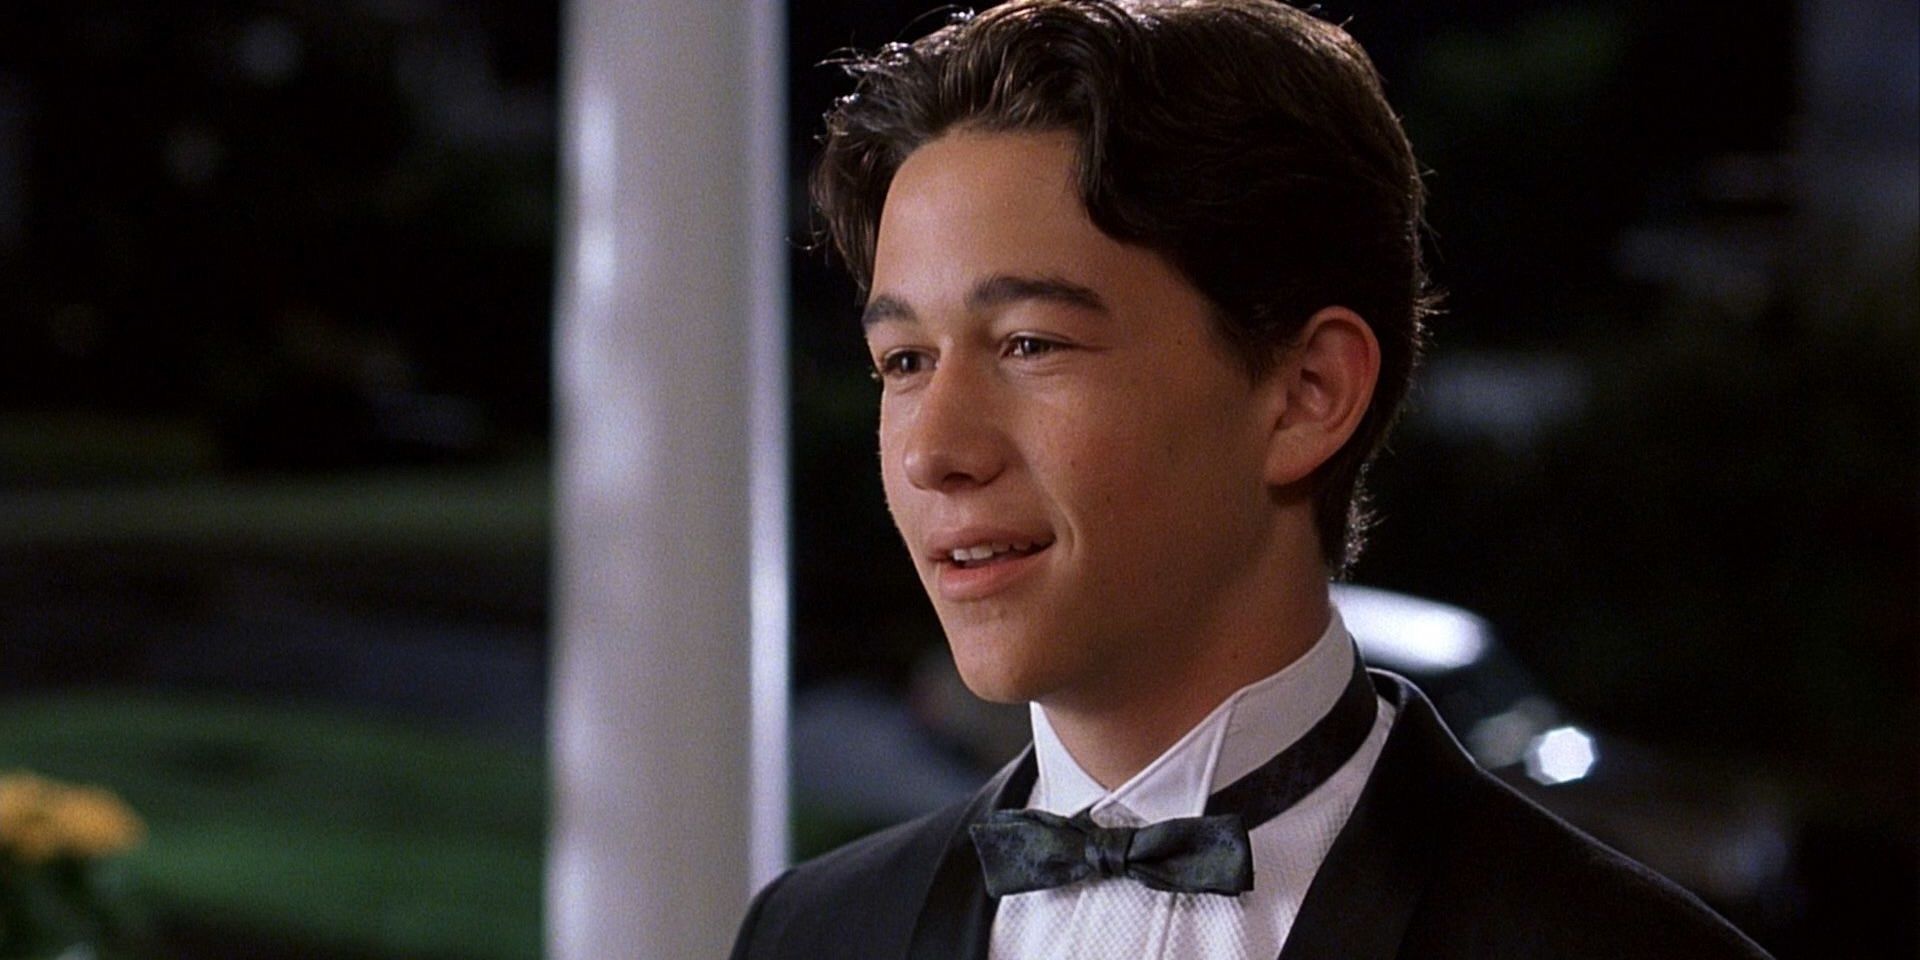 Joseph Gordon-Levitt in 10 Things I Hate About You